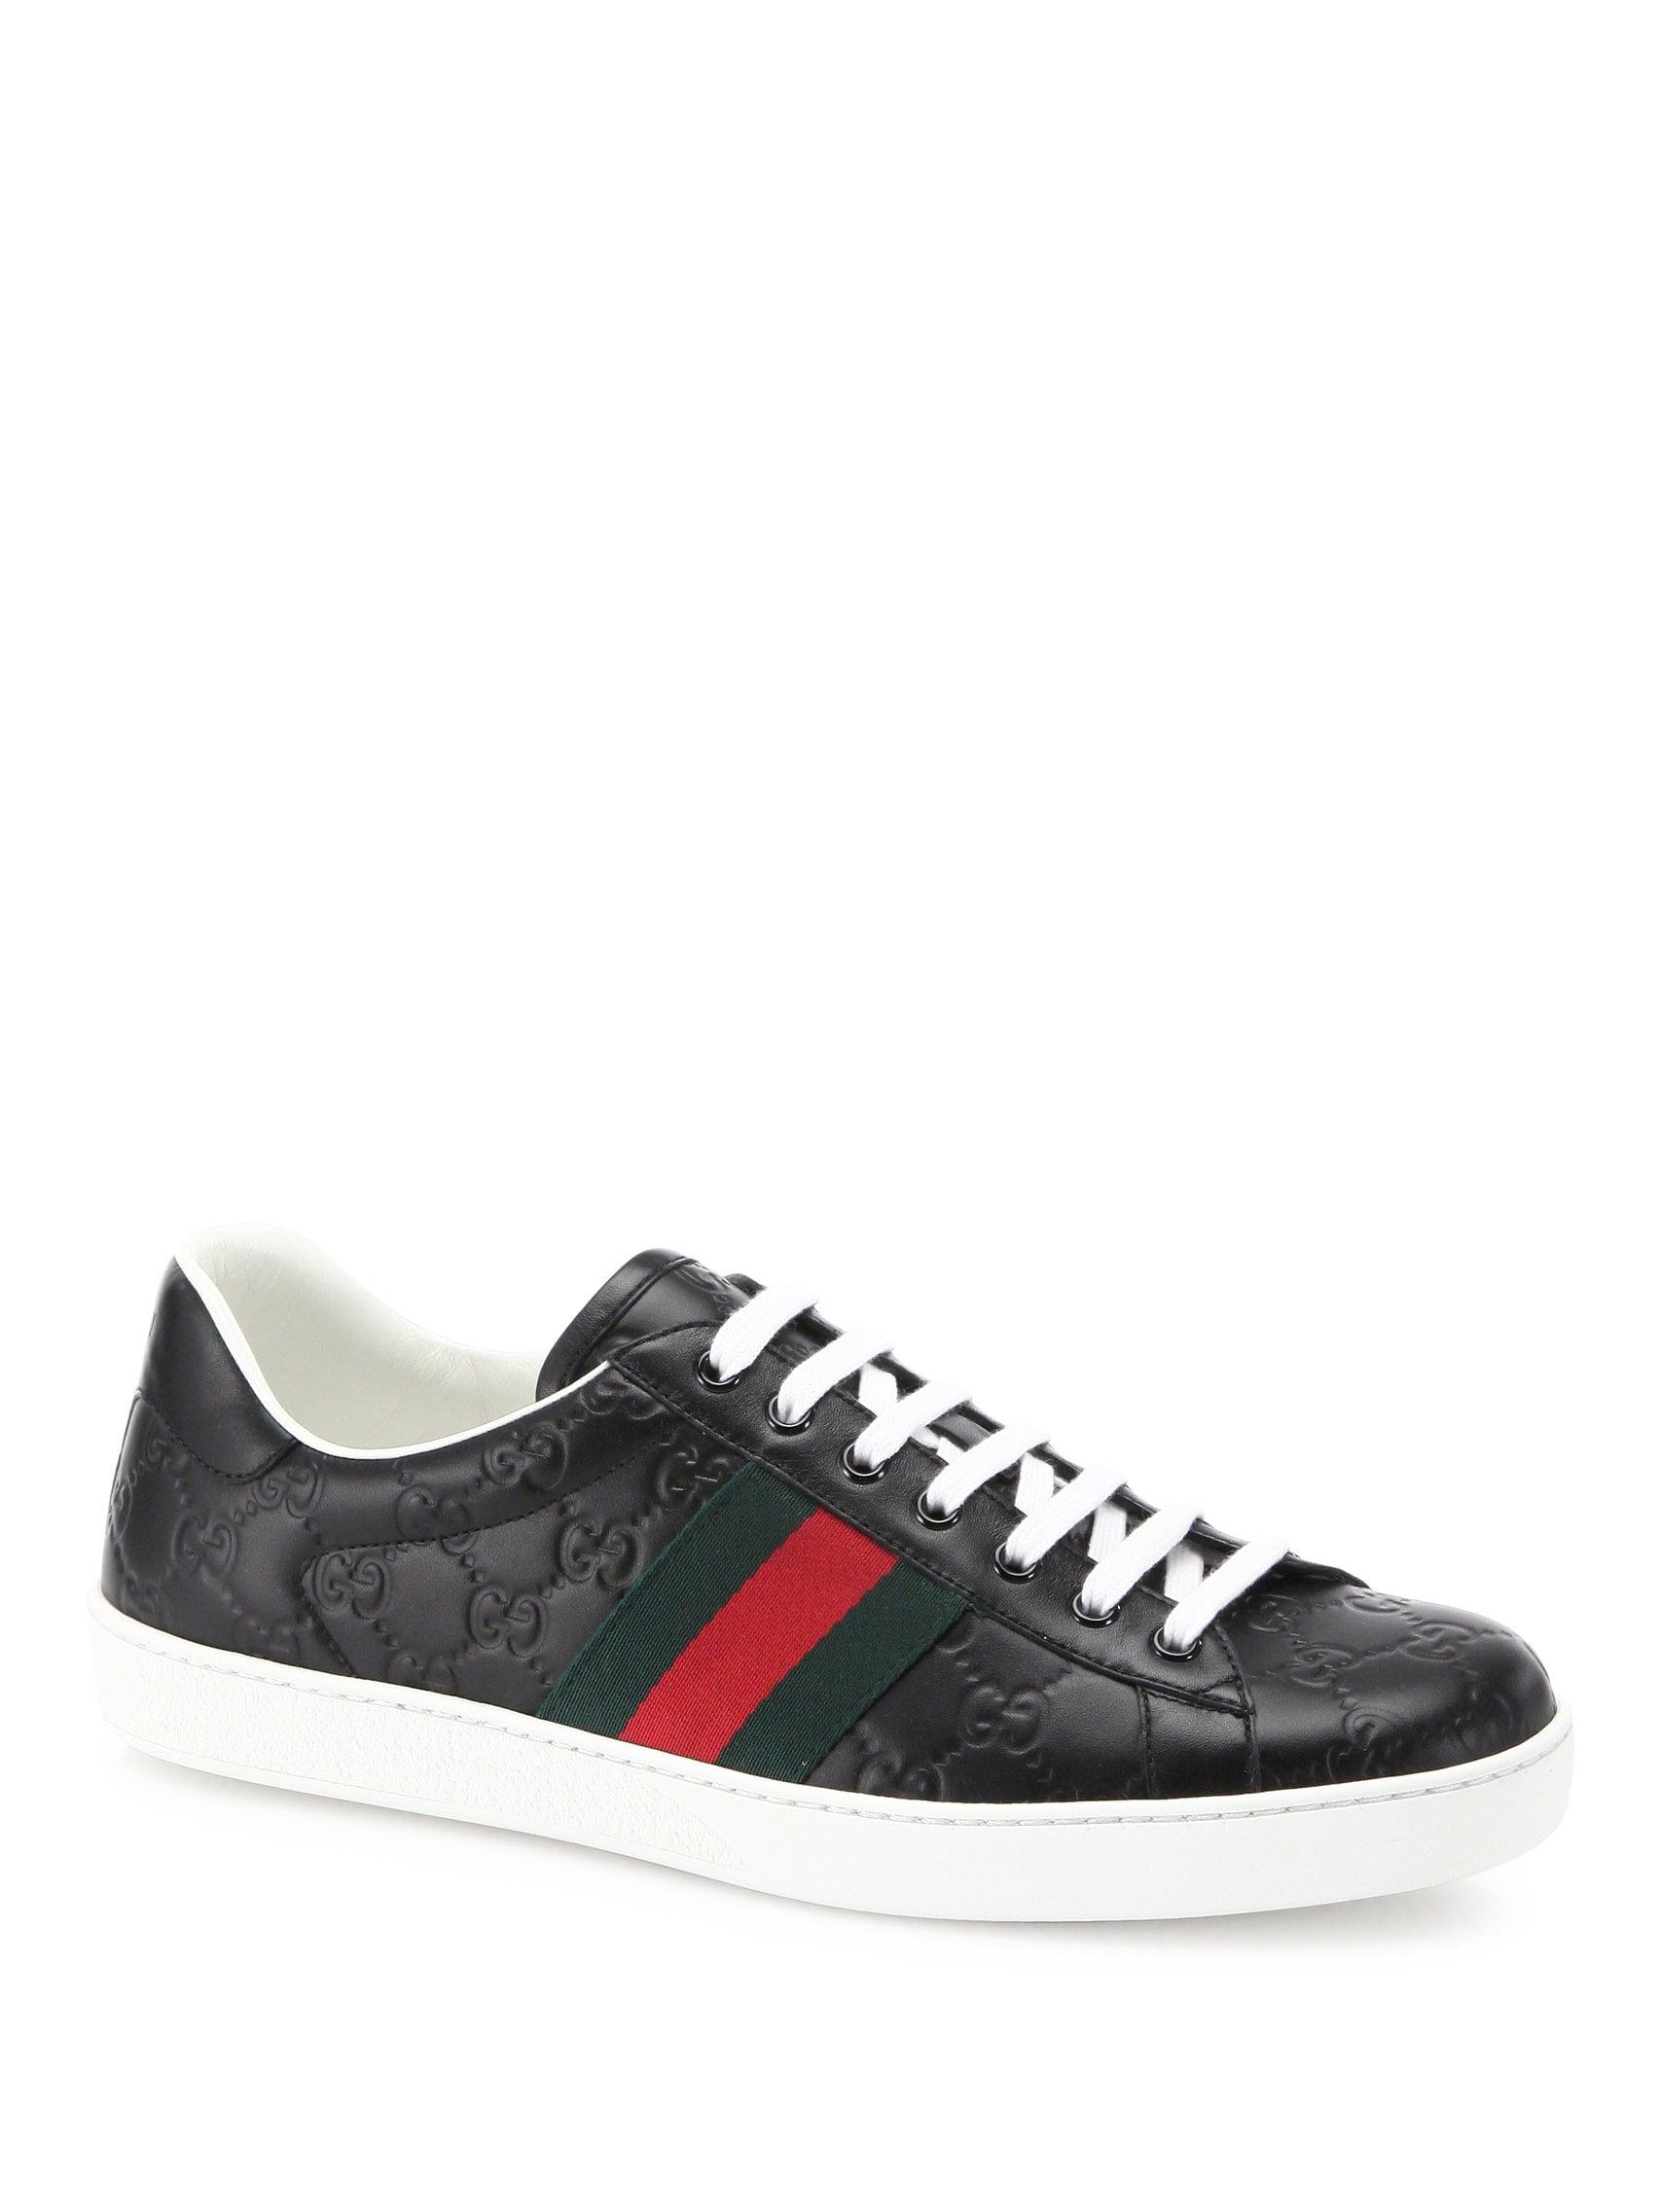 Lyst - Gucci Ace Leather Sneakers in Black for Men